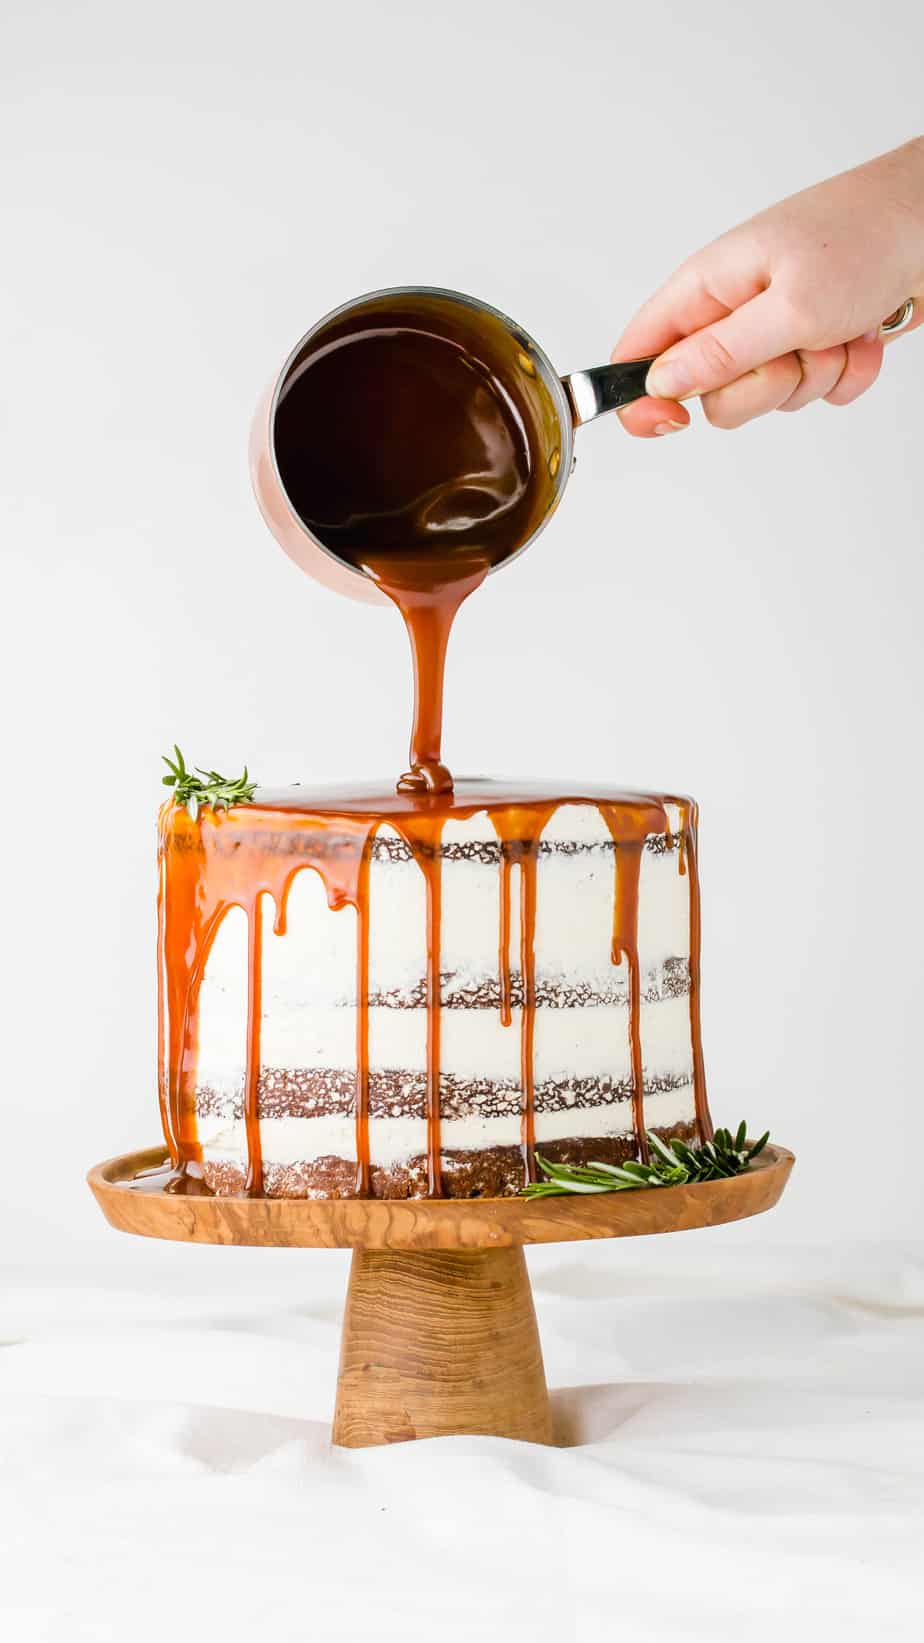 This Layered Gingerbread Cake with Salted Caramel Sauce is the ultimate festive season recipe, plus WIN a Classic Roasting Pan from Scanpan South Africa!